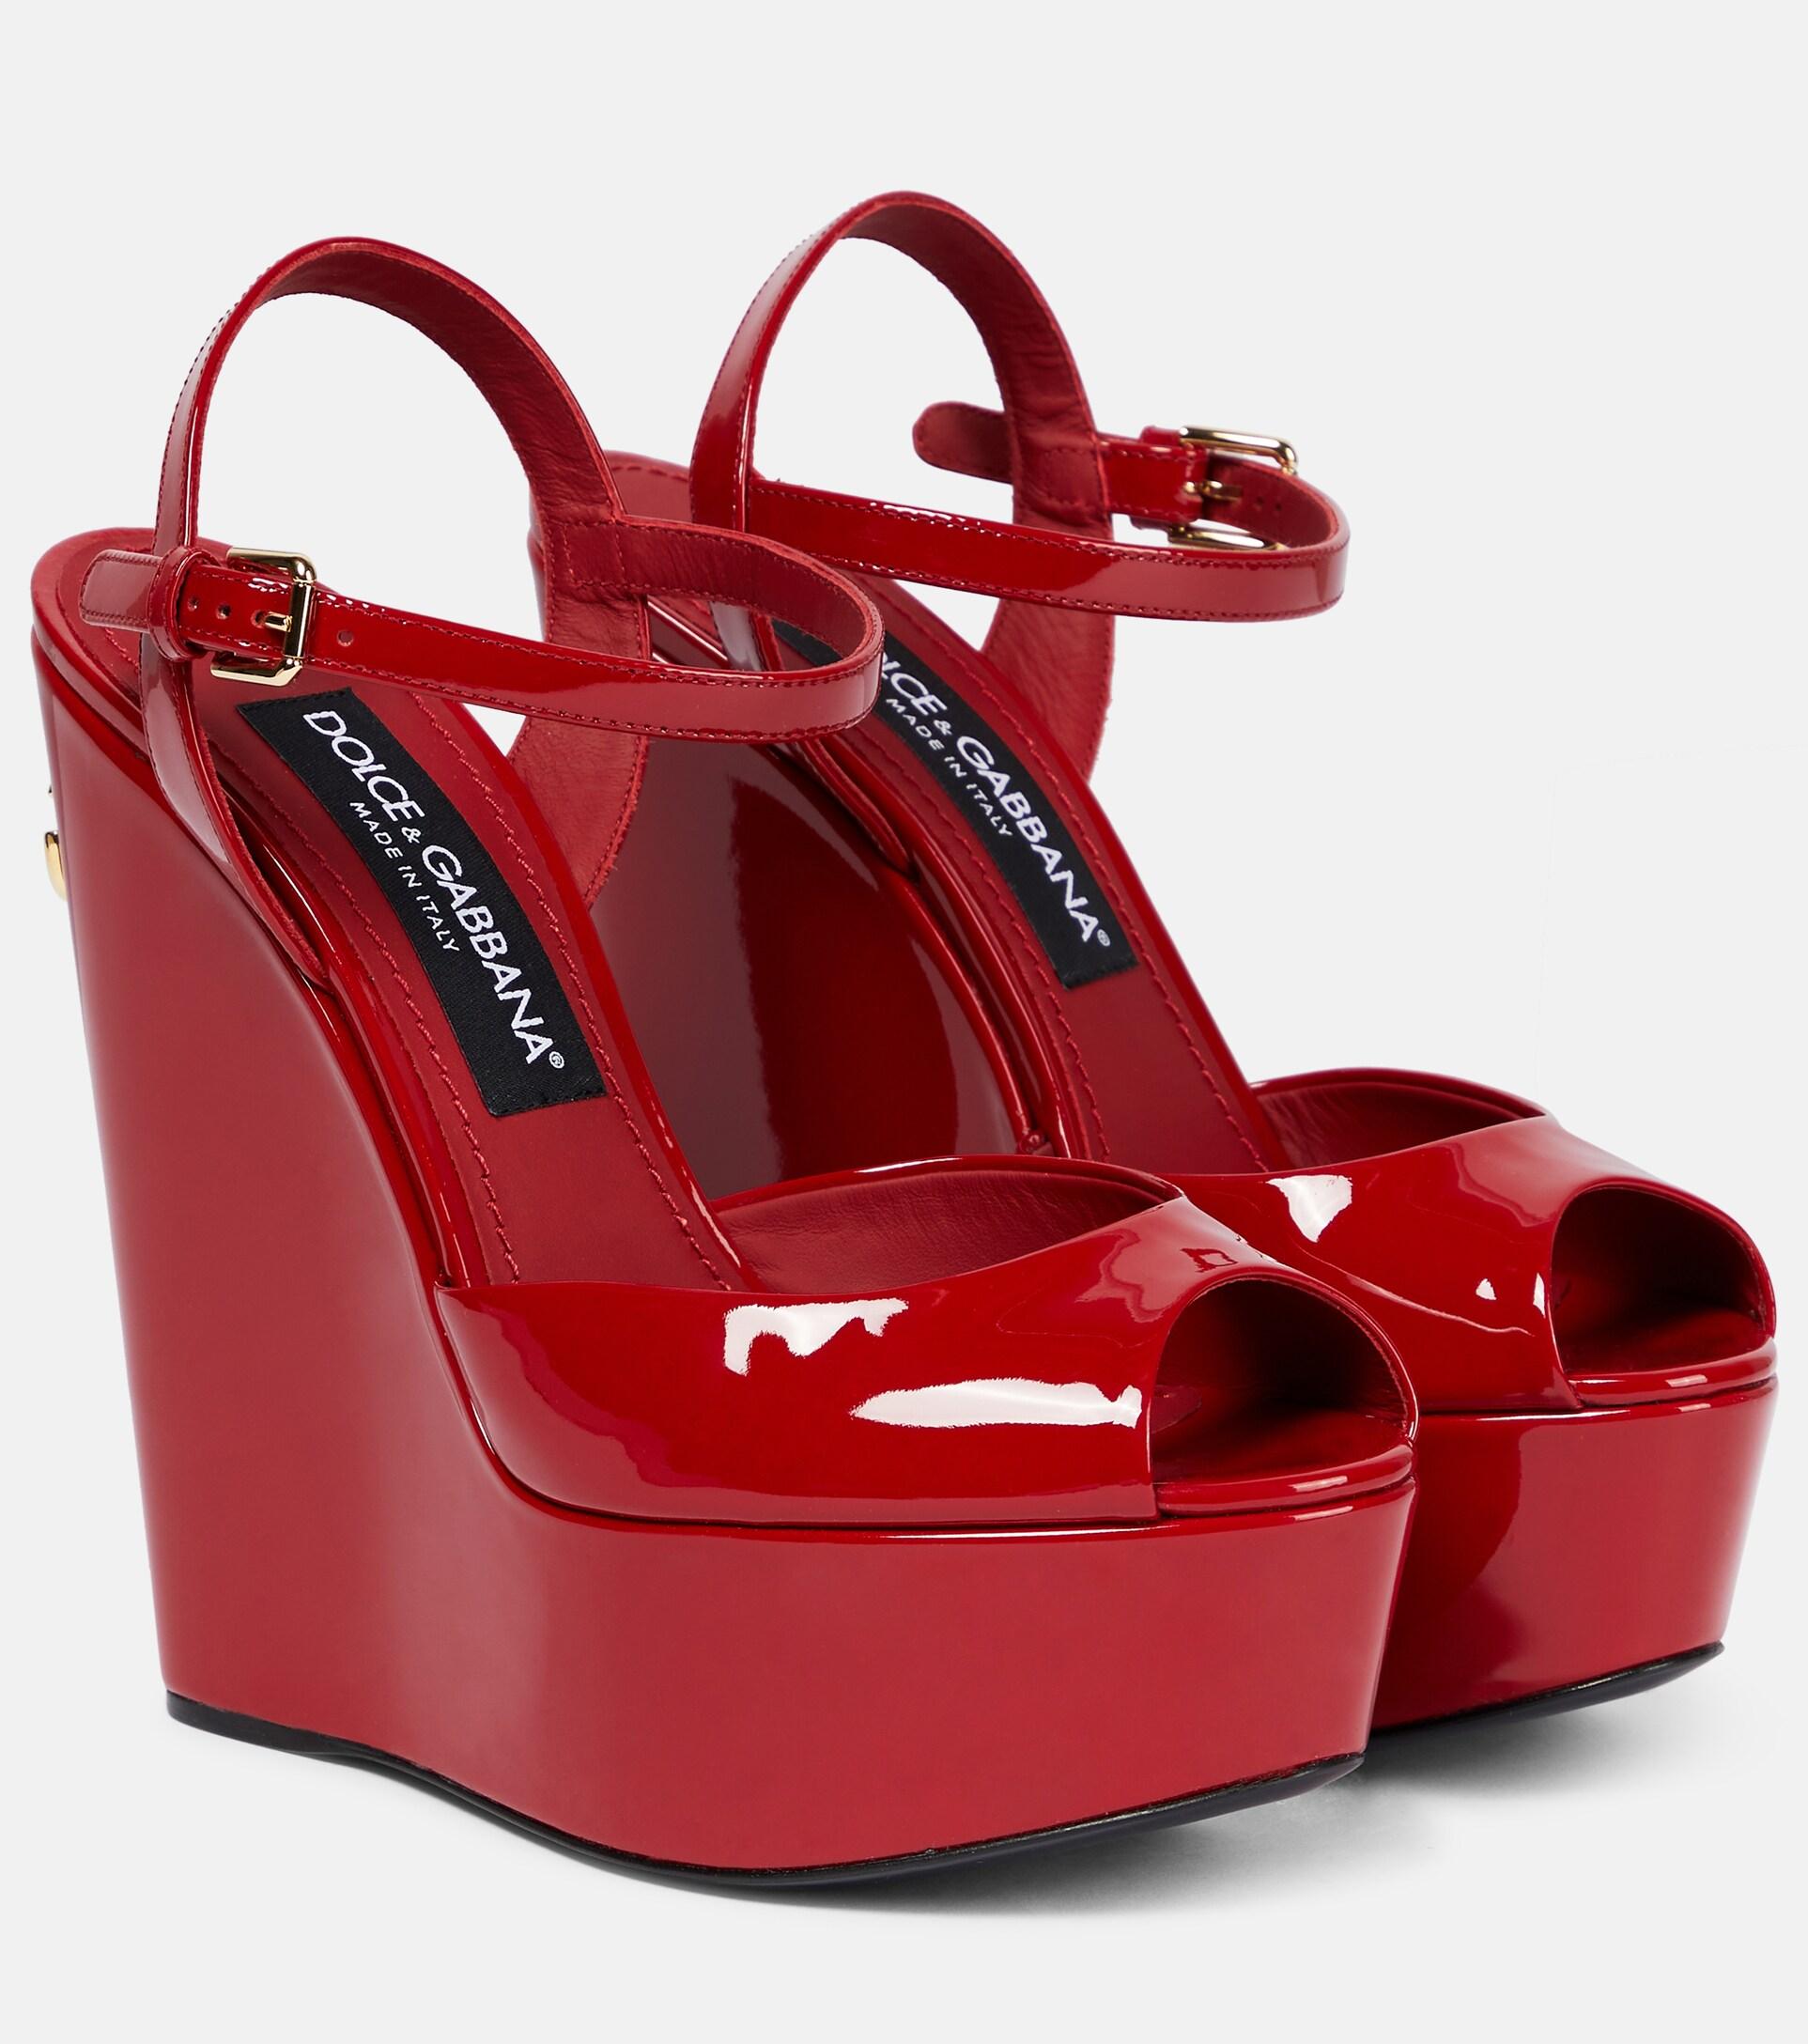 Dolce & Gabbana Wedge Platform Patent Leather Sandals in Red | Lyst